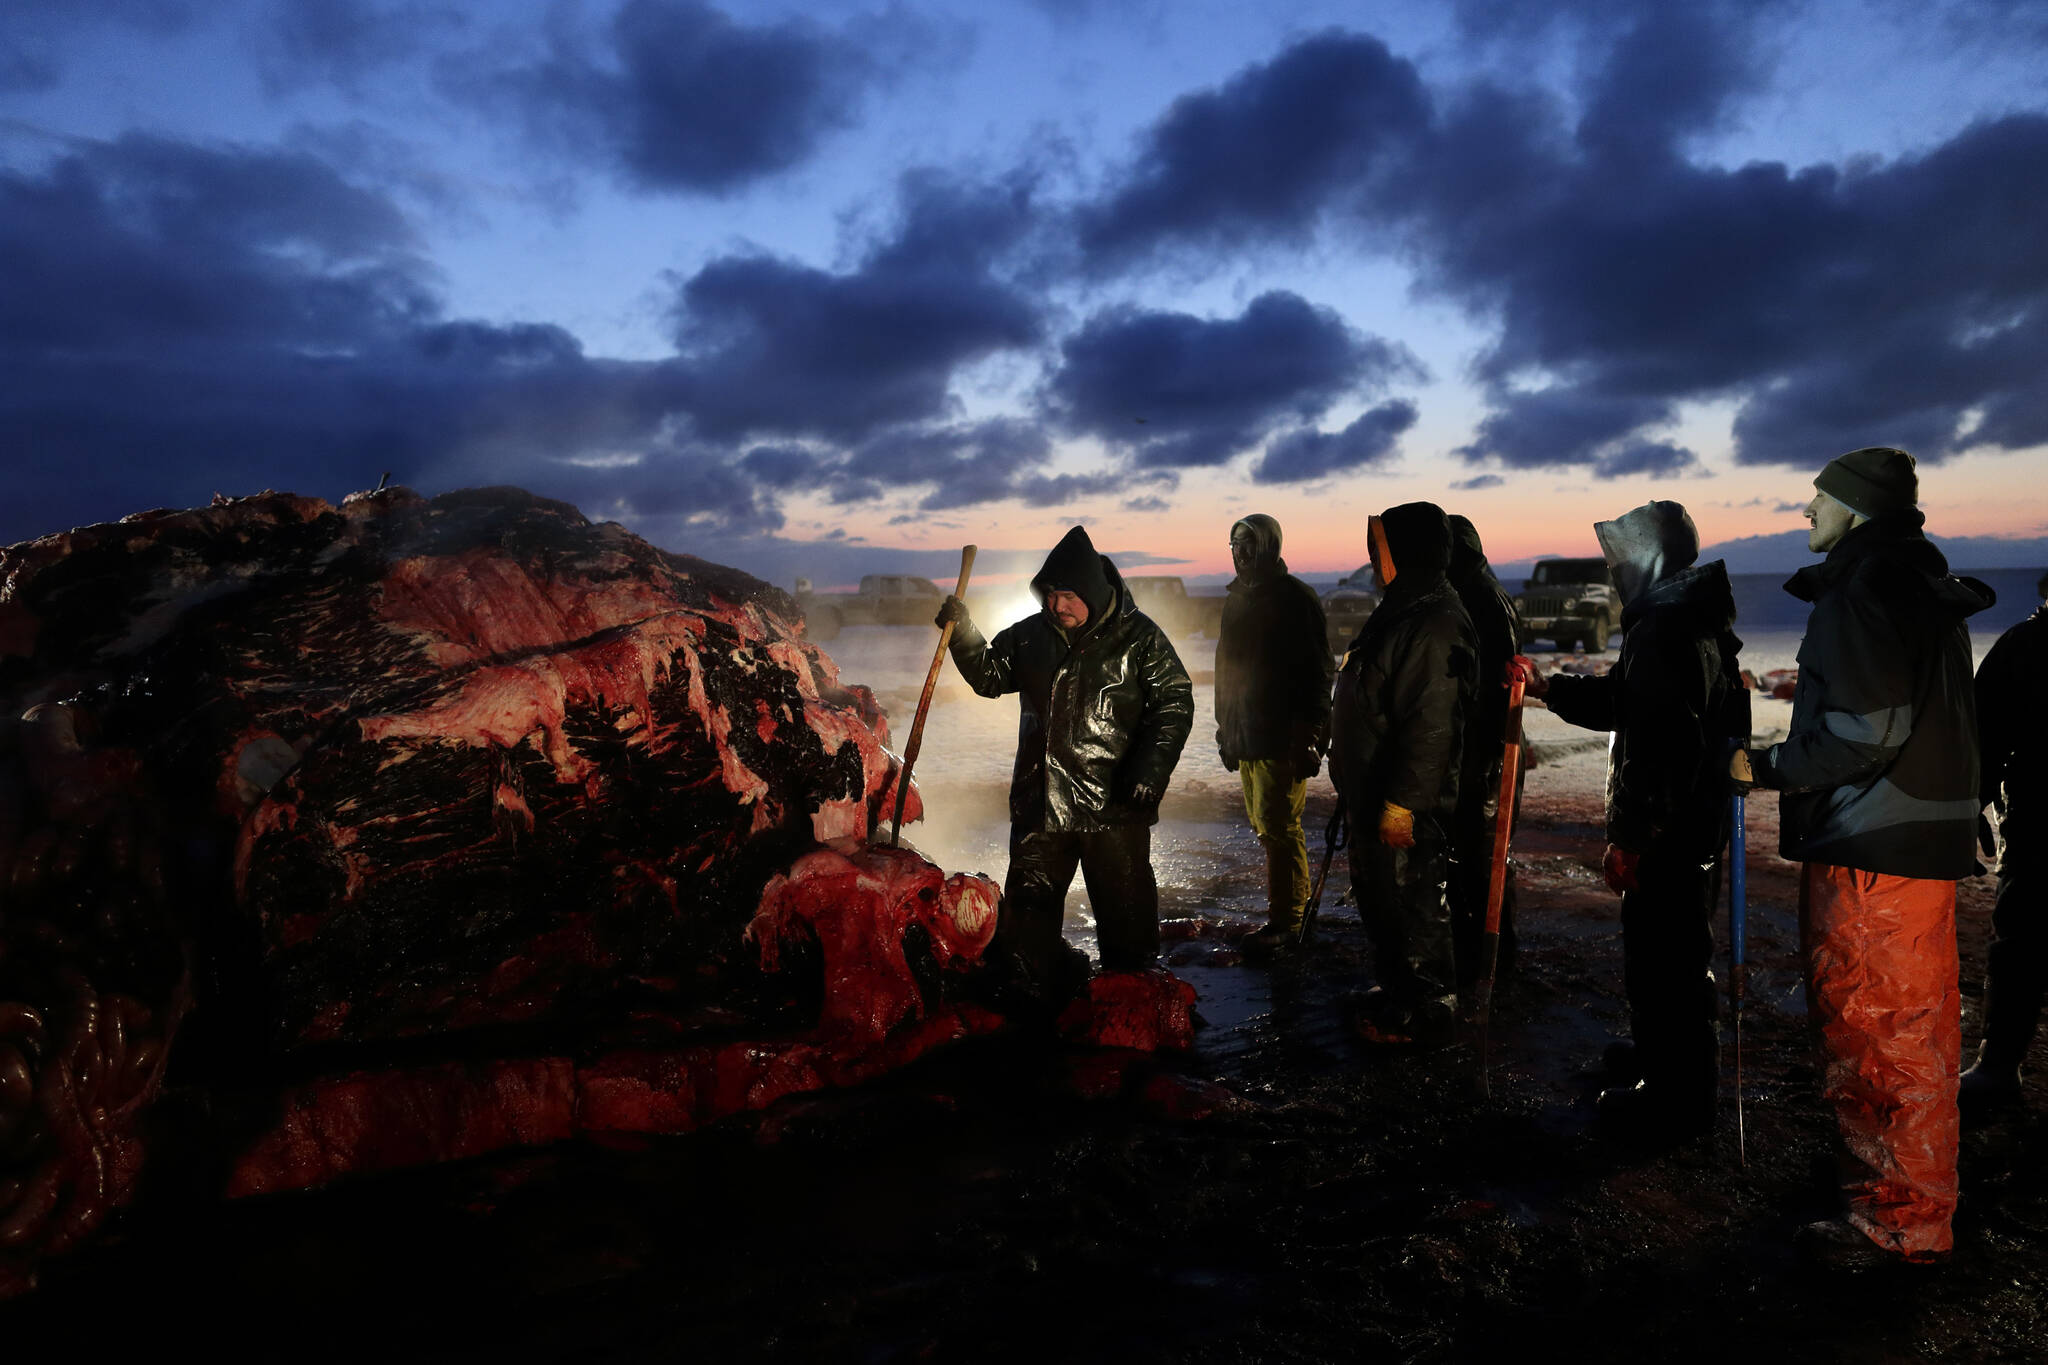 Fredrick Brower, center, helps cut up a bowhead whale caught by Inupiat subsistence hunters on a field near Barrow, Alaska, Oc. 7, 2014. After tidal surges and high winds from the remnants of a rare typhoon caused extensive flood damage to homes along Alaska's western coast in September, the U.S. government stepped in to help residents largely Alaska Natives repair property damage. Residents who opened Federal Emergency Management Agency brochures expecting to find instructions on how to file for aid in Alaska Native languages like Yup'ik or Inupiaq instead were reading nonsensical phrases. (AP Photo / Gregory Bull)